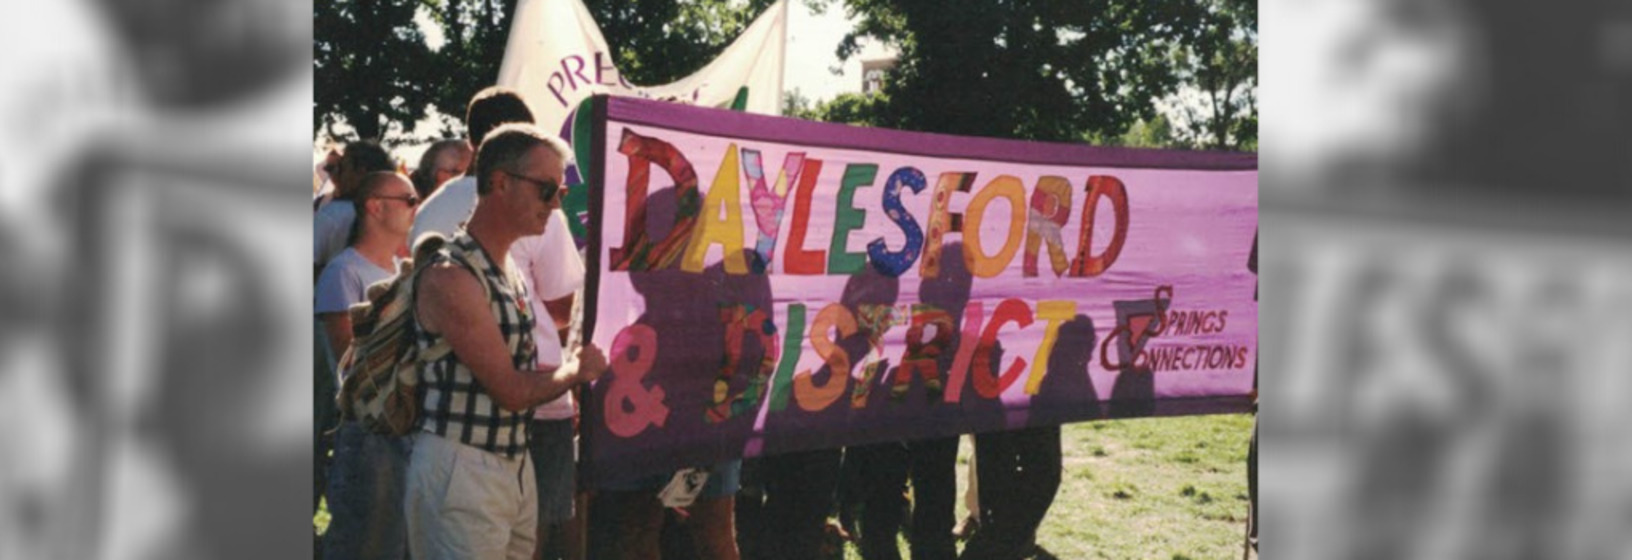 'Daylesford and District' float in Pride March